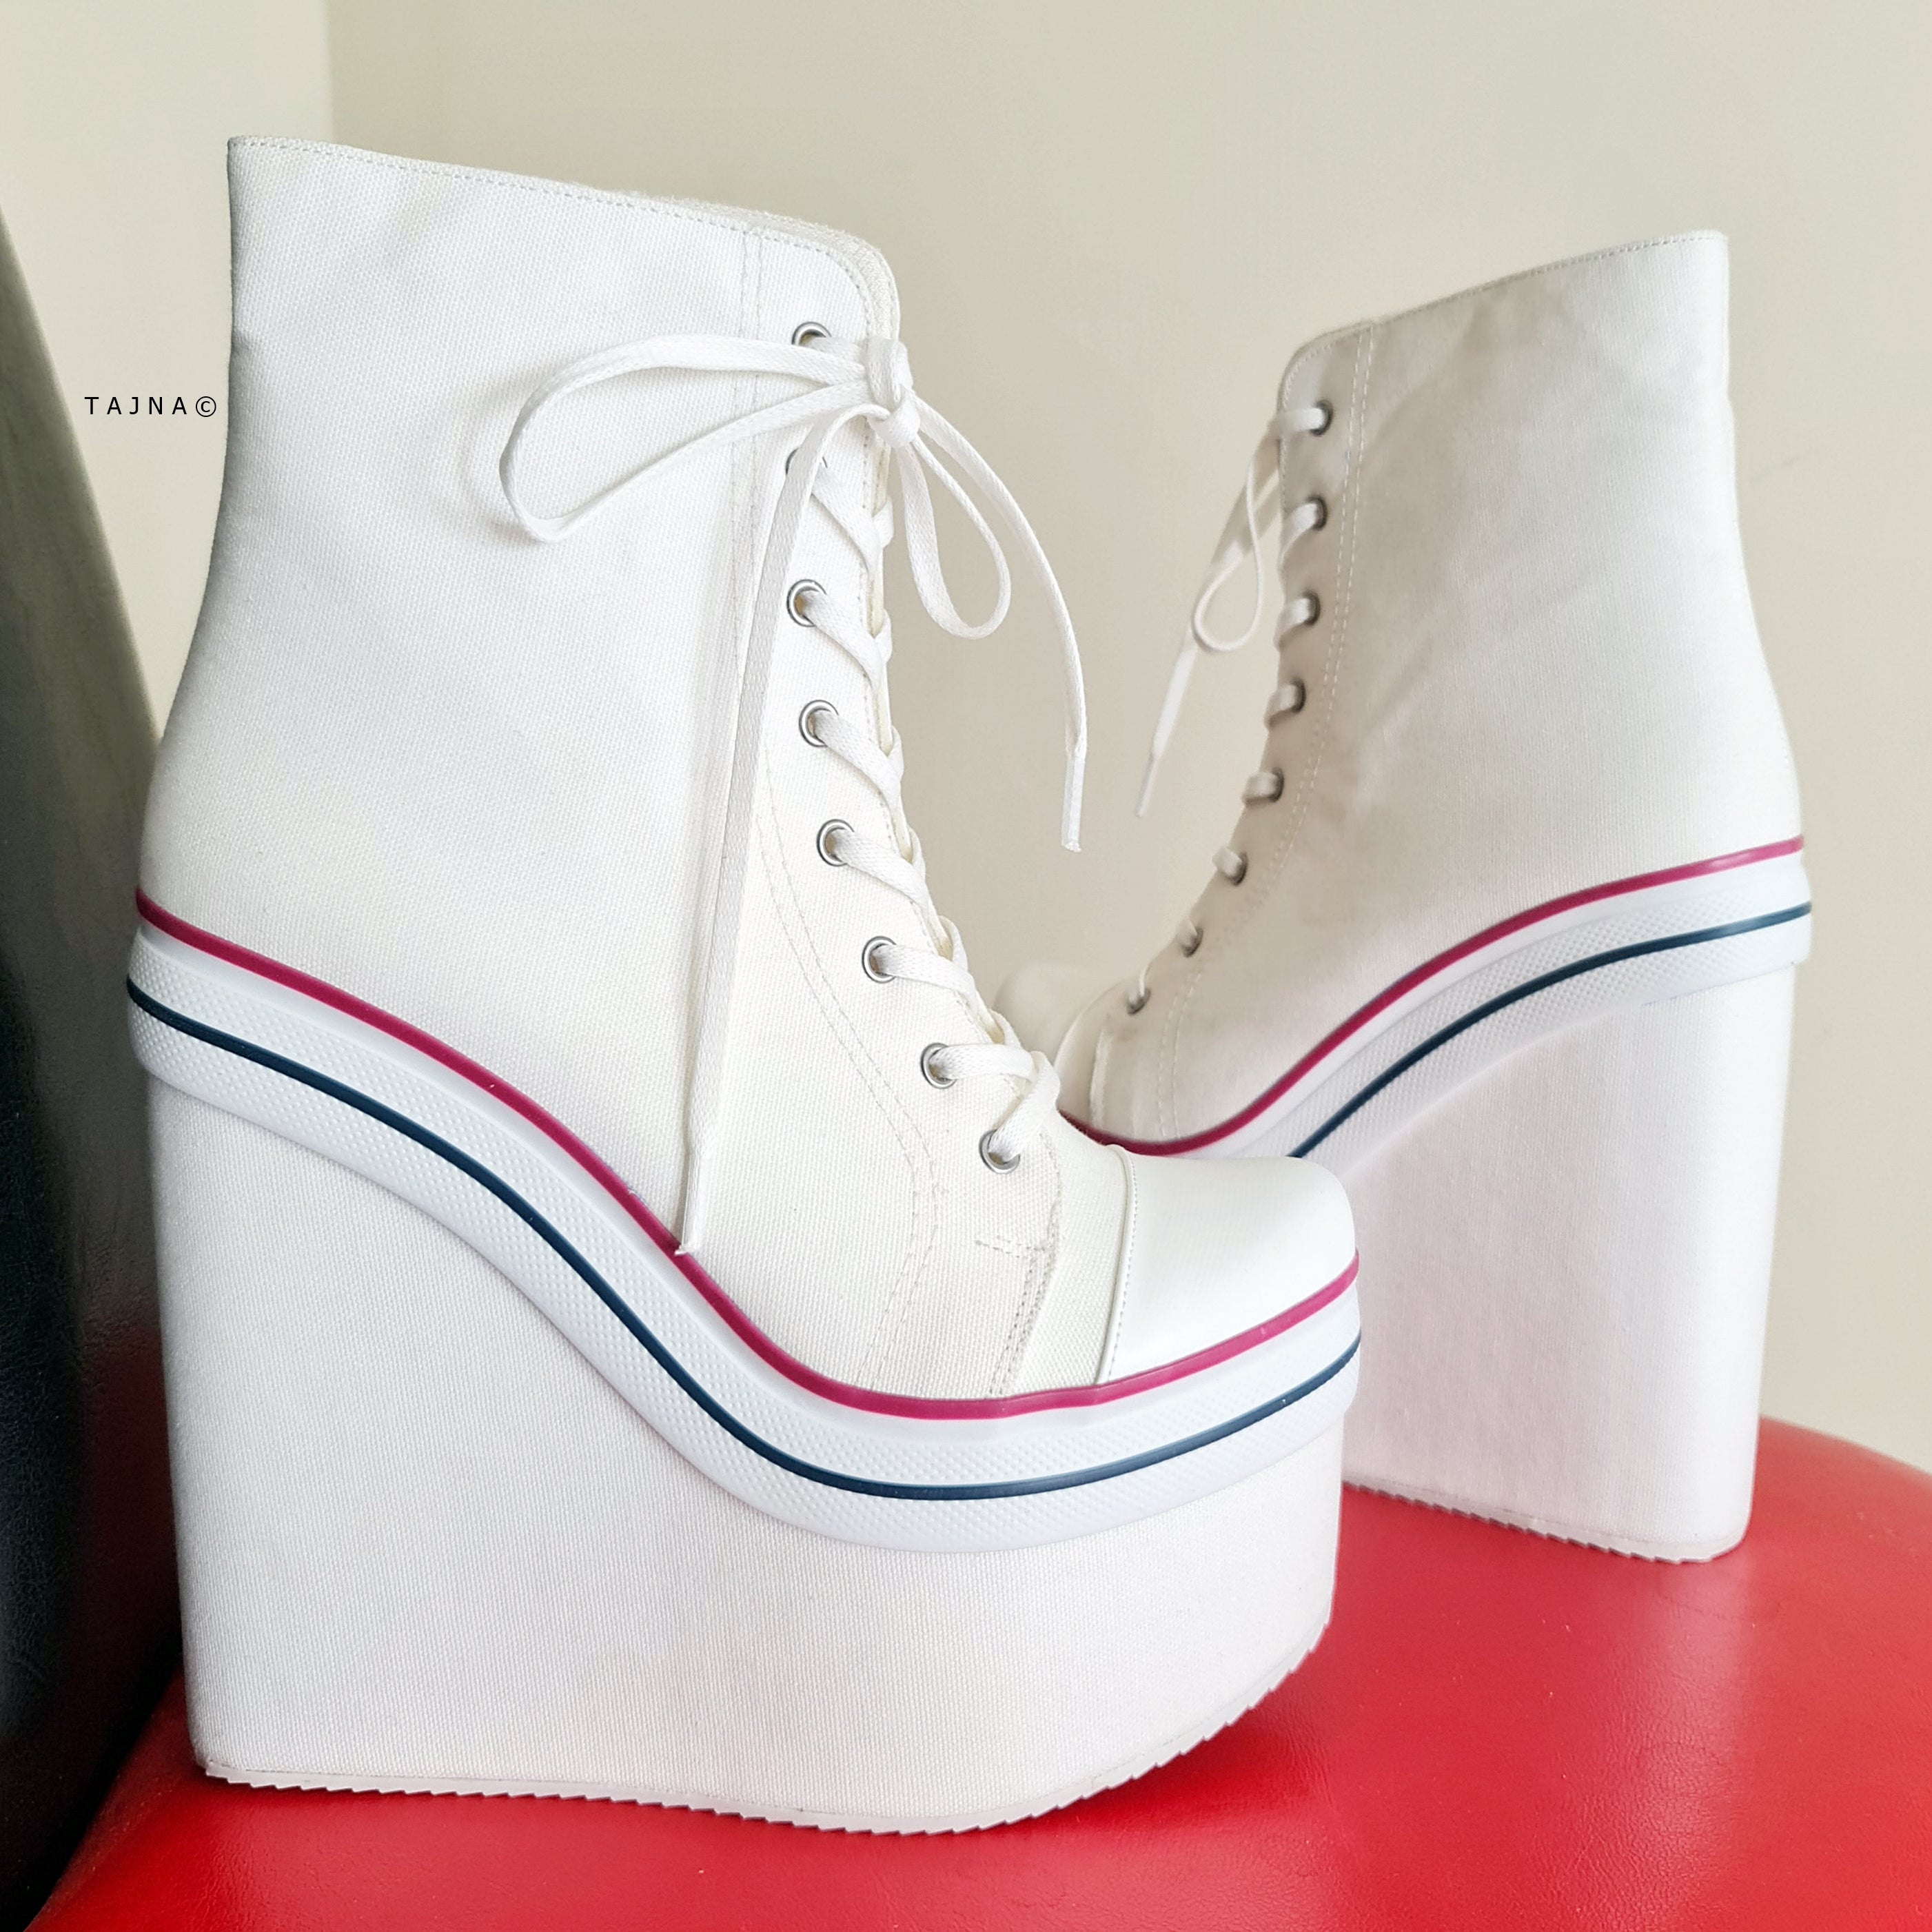 White Lace Up High Heel Wedge Sport Platforms